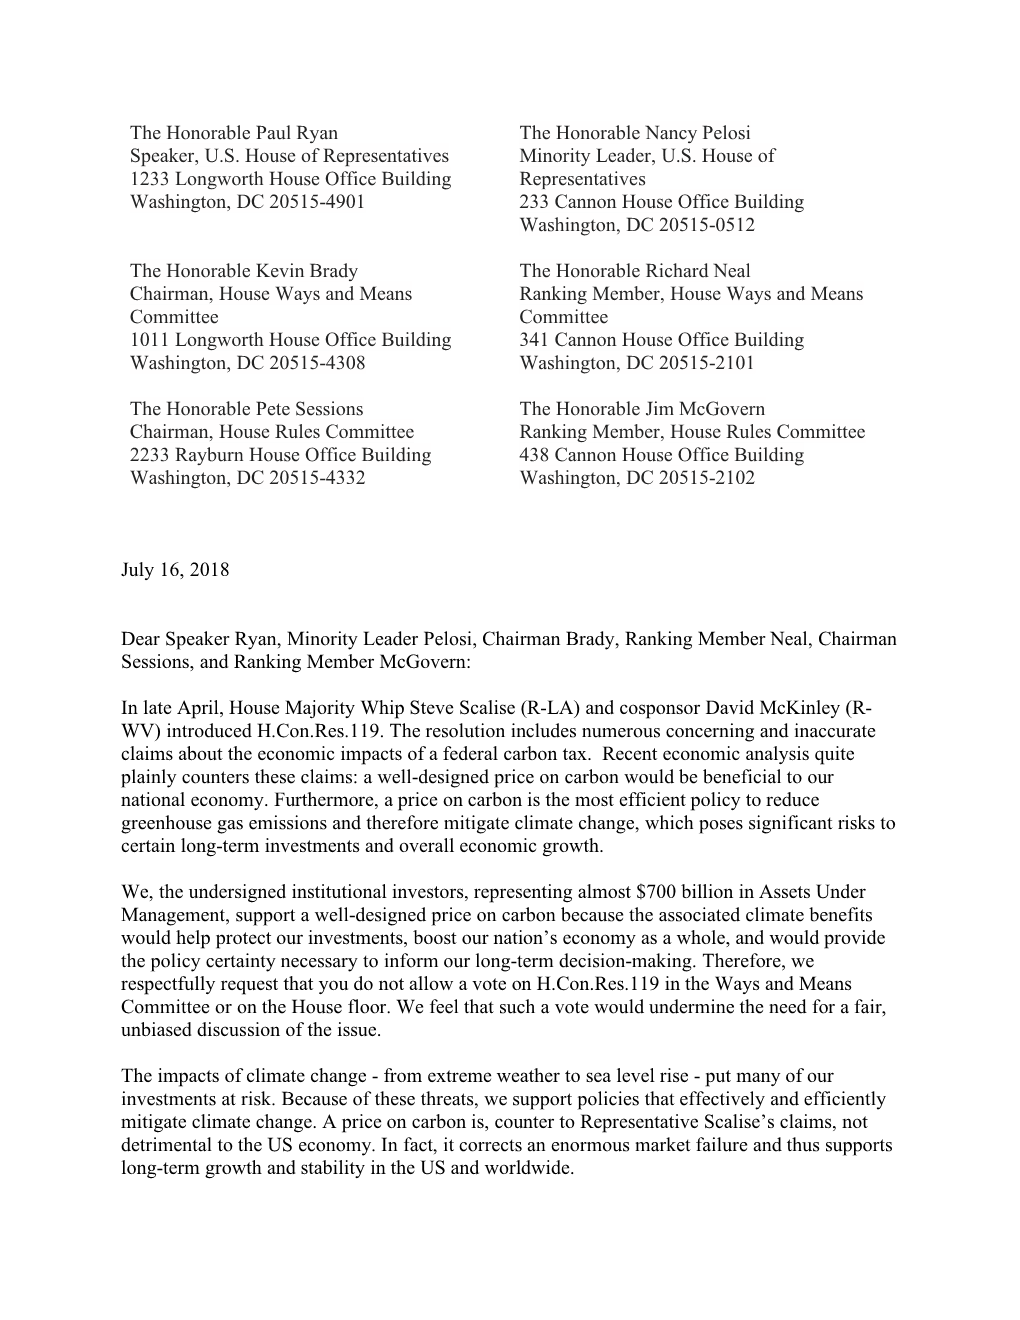 Investor Letter on Scalise Carbon Tax Resolution